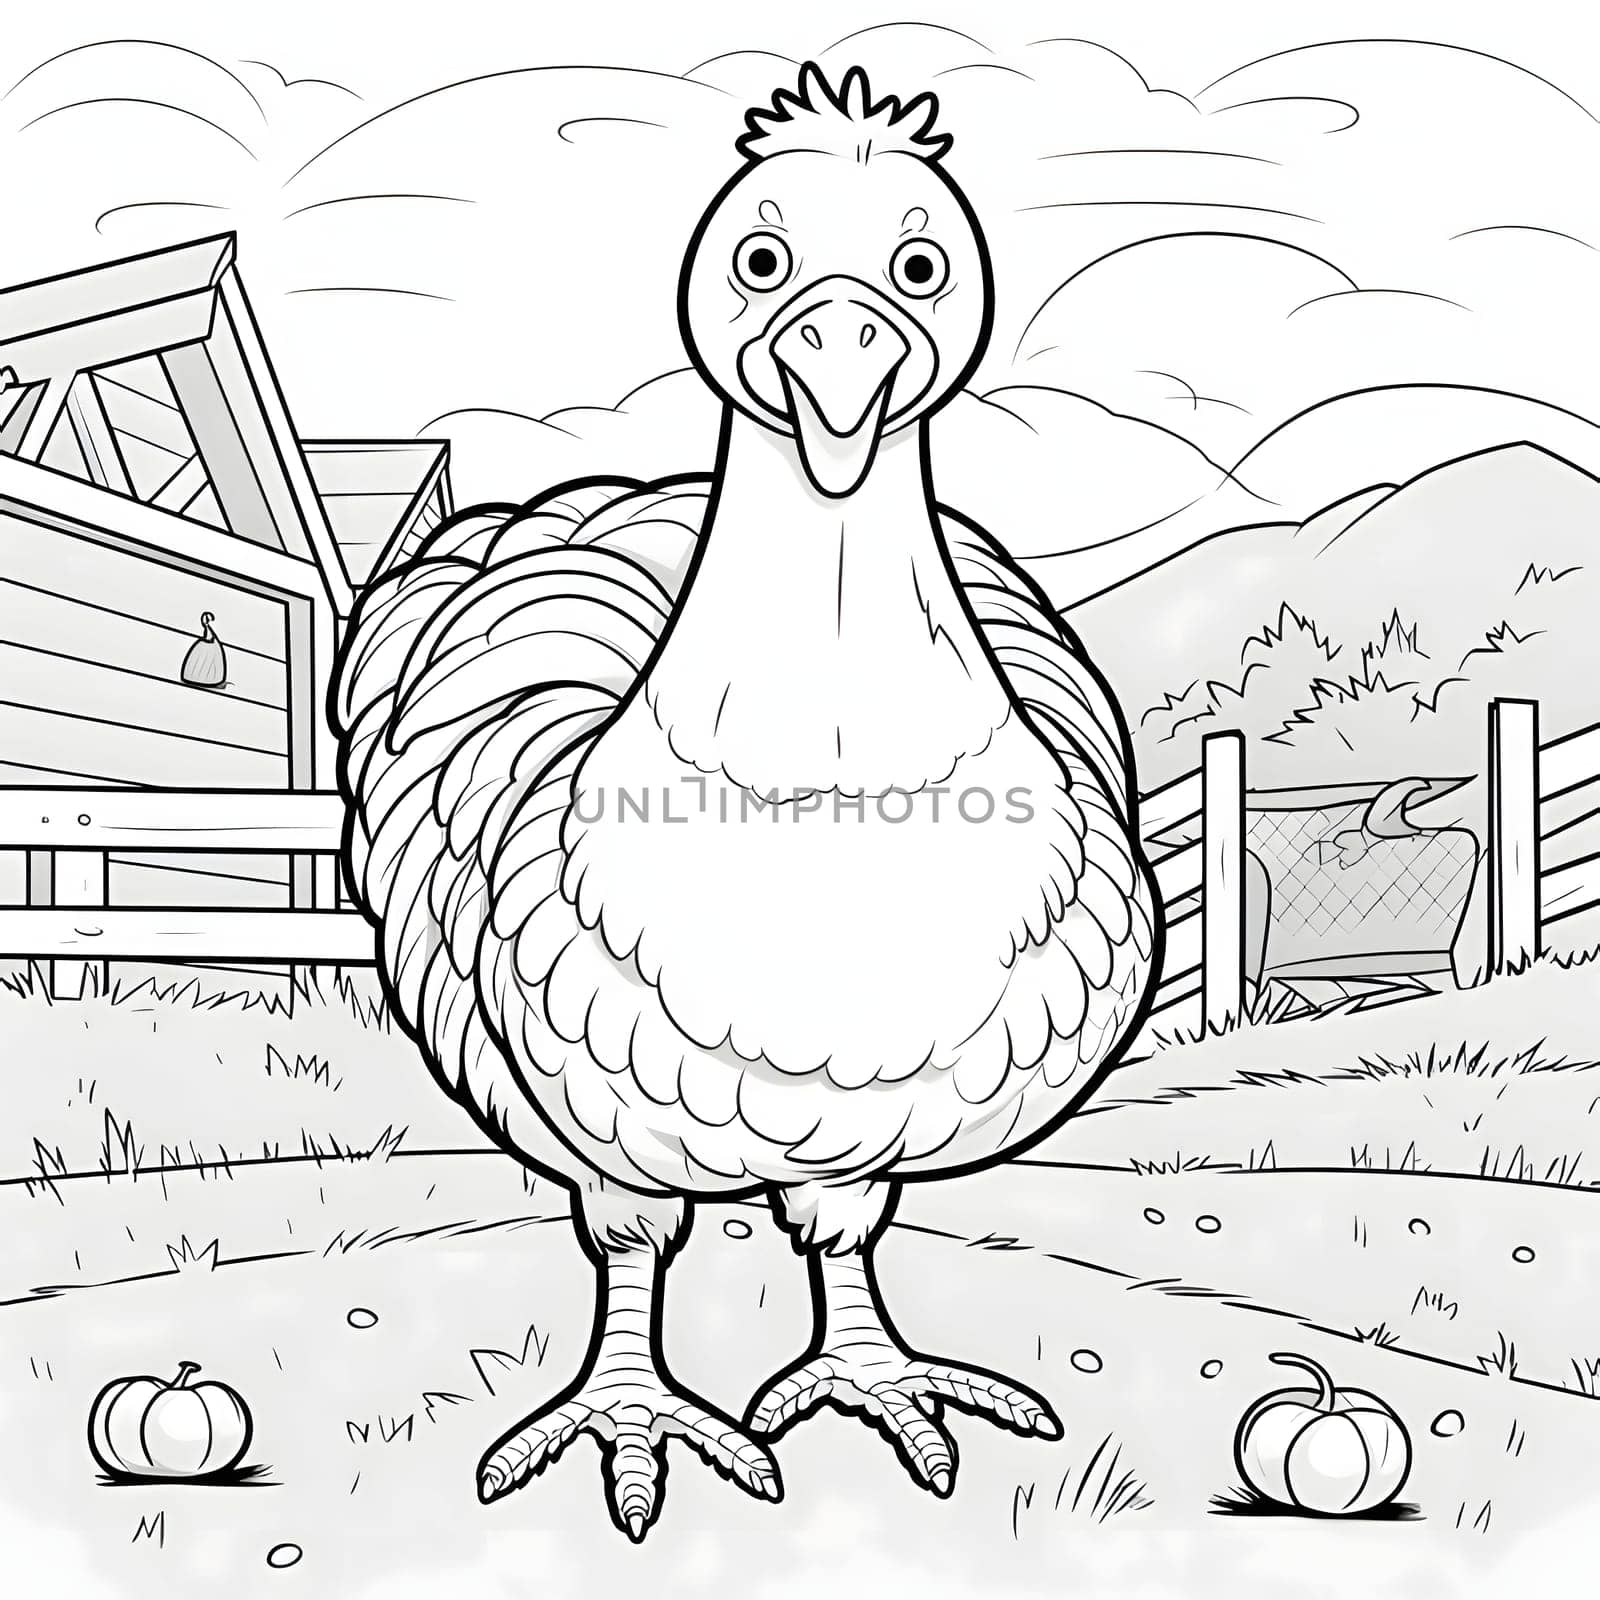 Black and white coloring book, a small cheerful in dyczek on the farm. Turkey as the main dish of thanksgiving for the harvest. An atmosphere of joy and celebration.